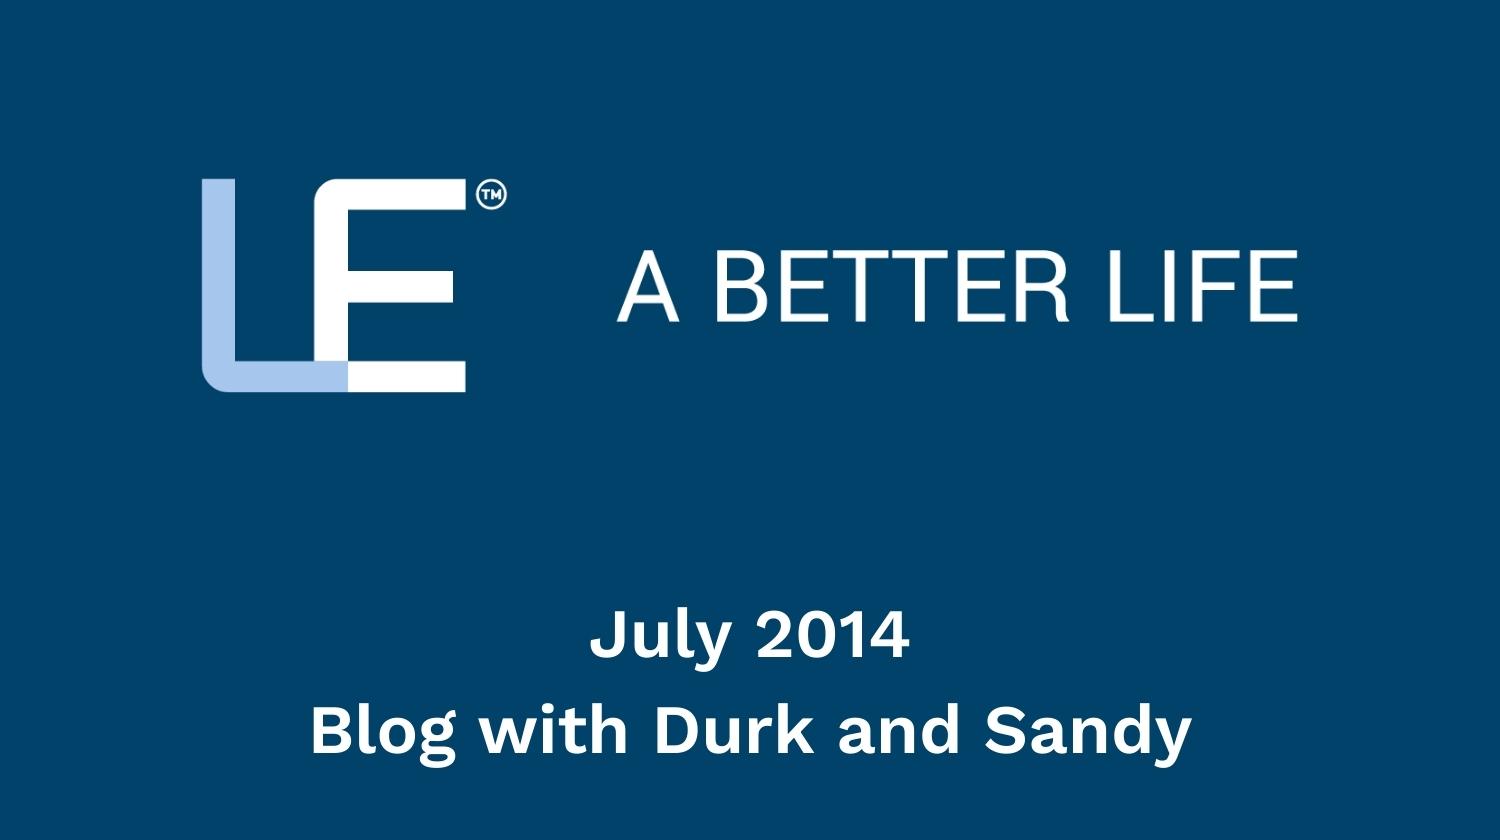 July 2014 Blog with Durk and Sandy